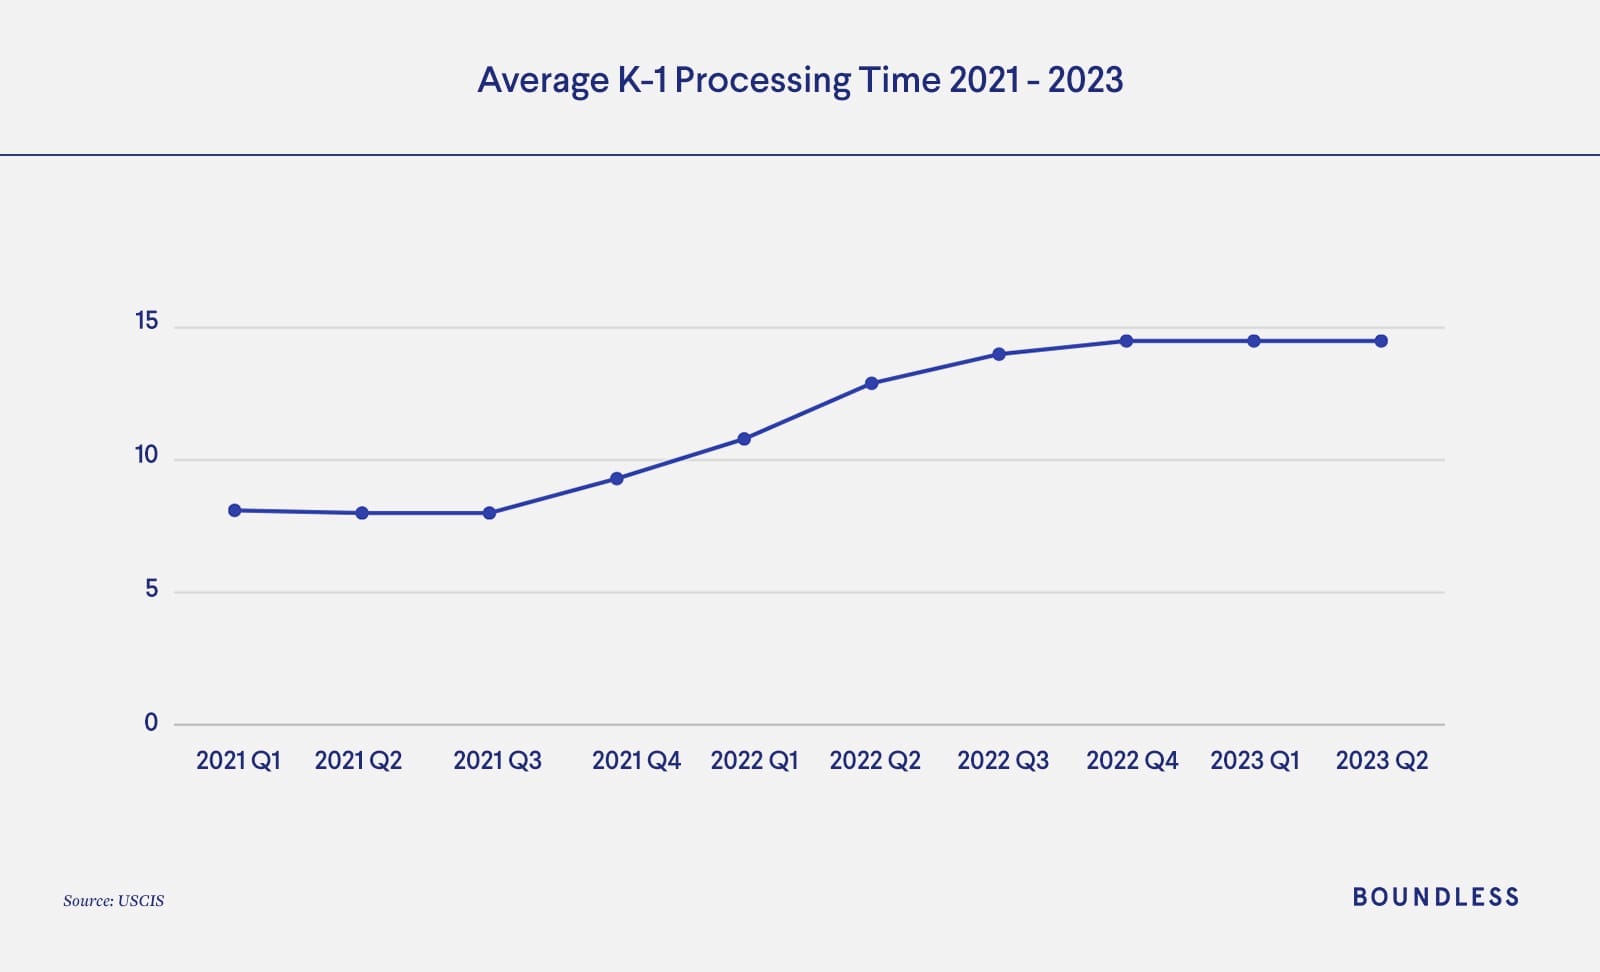 Graph showing average K-1 processing times 2021-2023